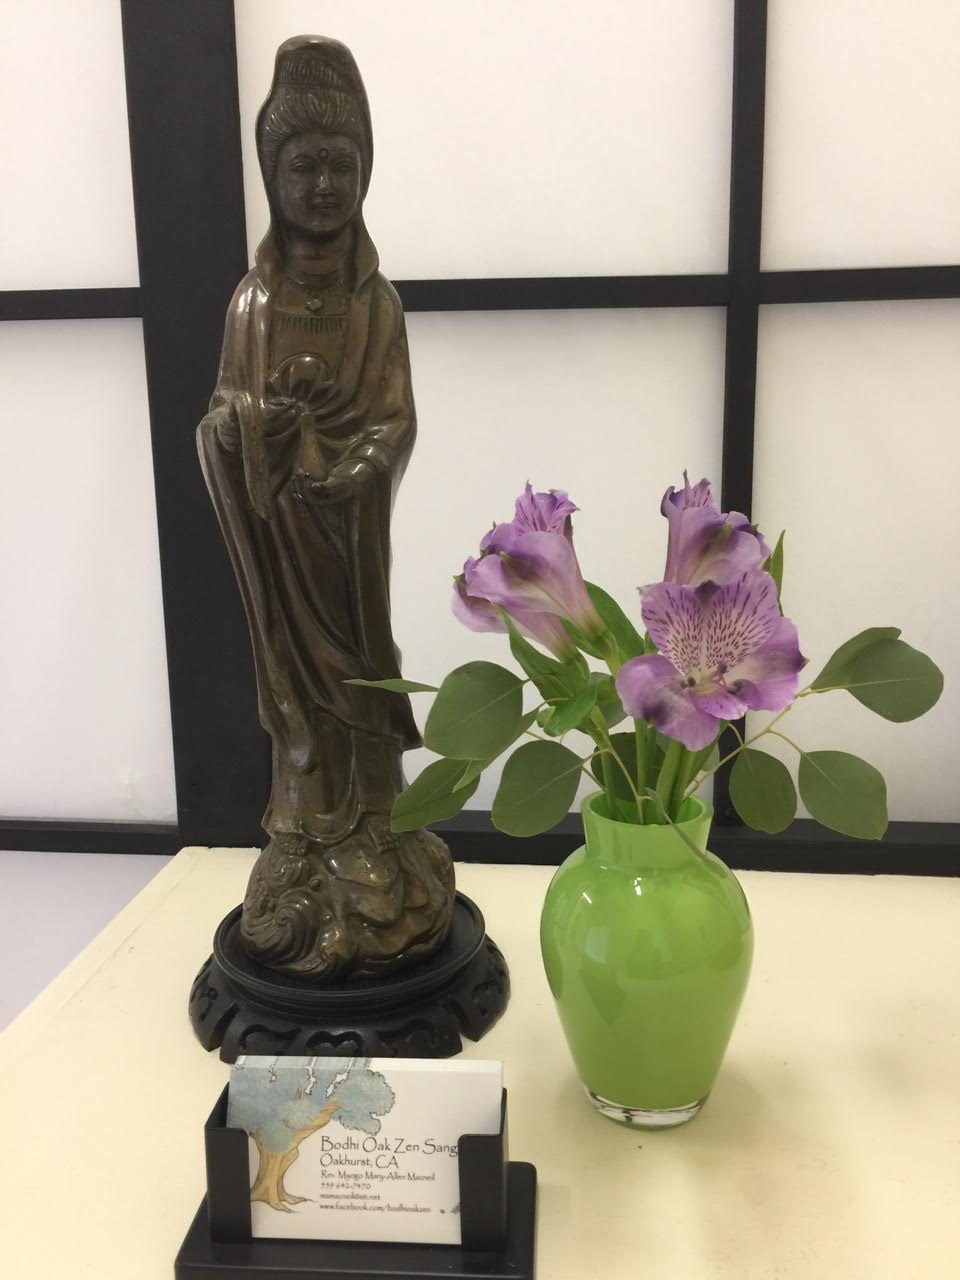 Business card and Buddhist statue